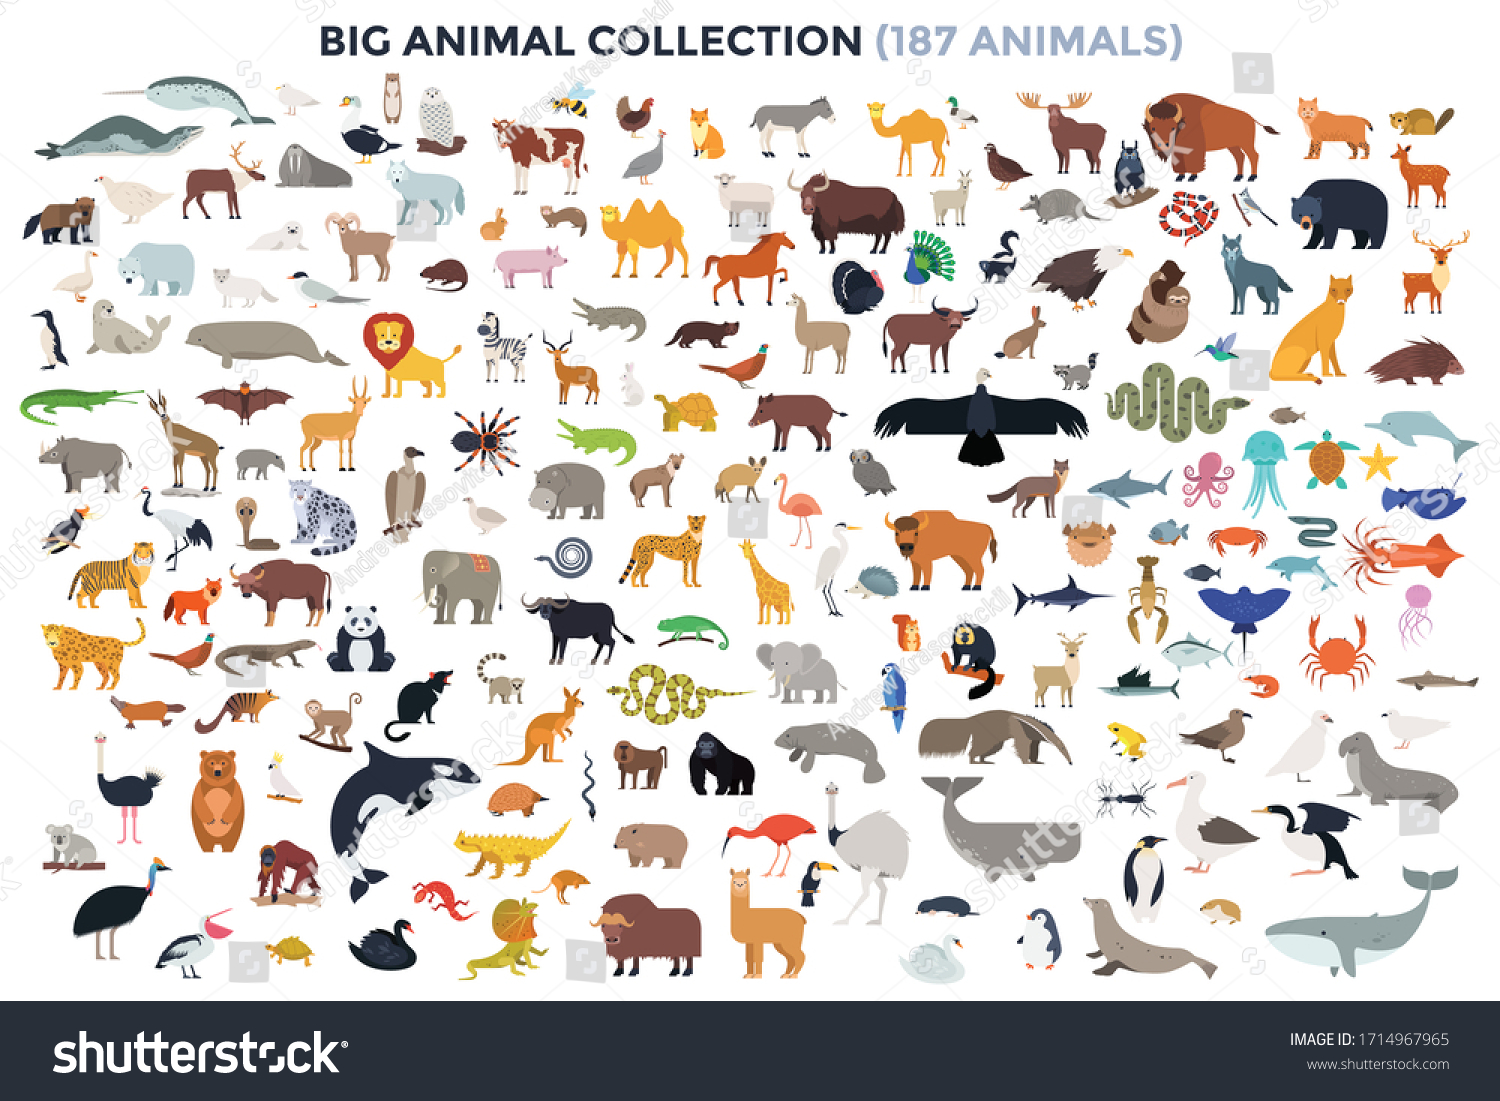 Big bundle of funny domestic and wild animals, marine mammals, reptiles, birds and fish. Collection of cute cartoon characters isolated on white background. Colorful vector illustration in flat style. #1714967965